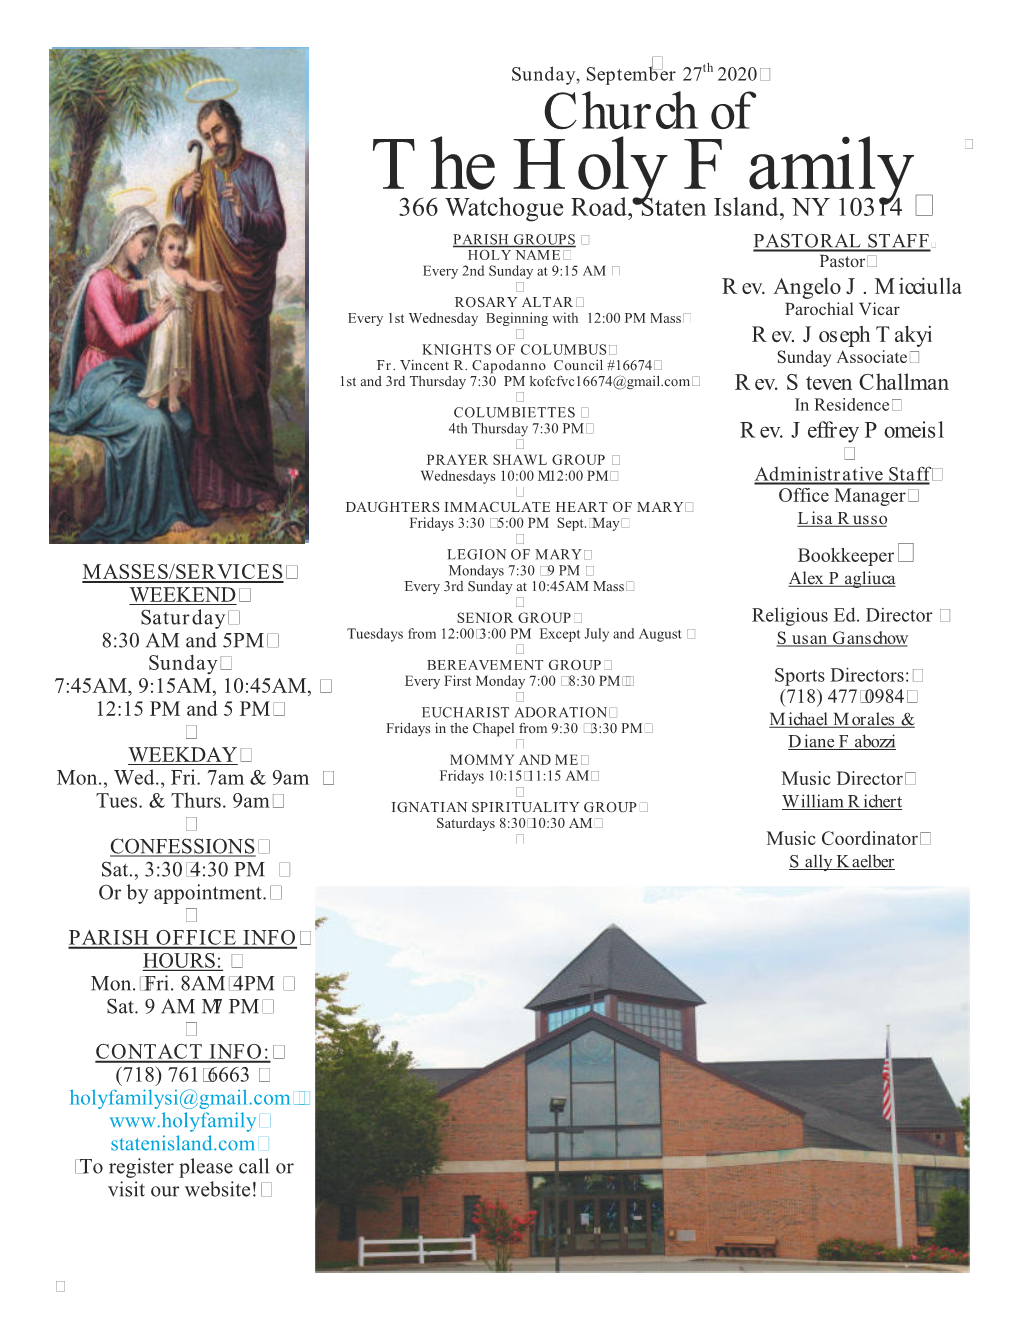 The Holy Family 366 Watchogue Road, Staten Island, NY 10314 